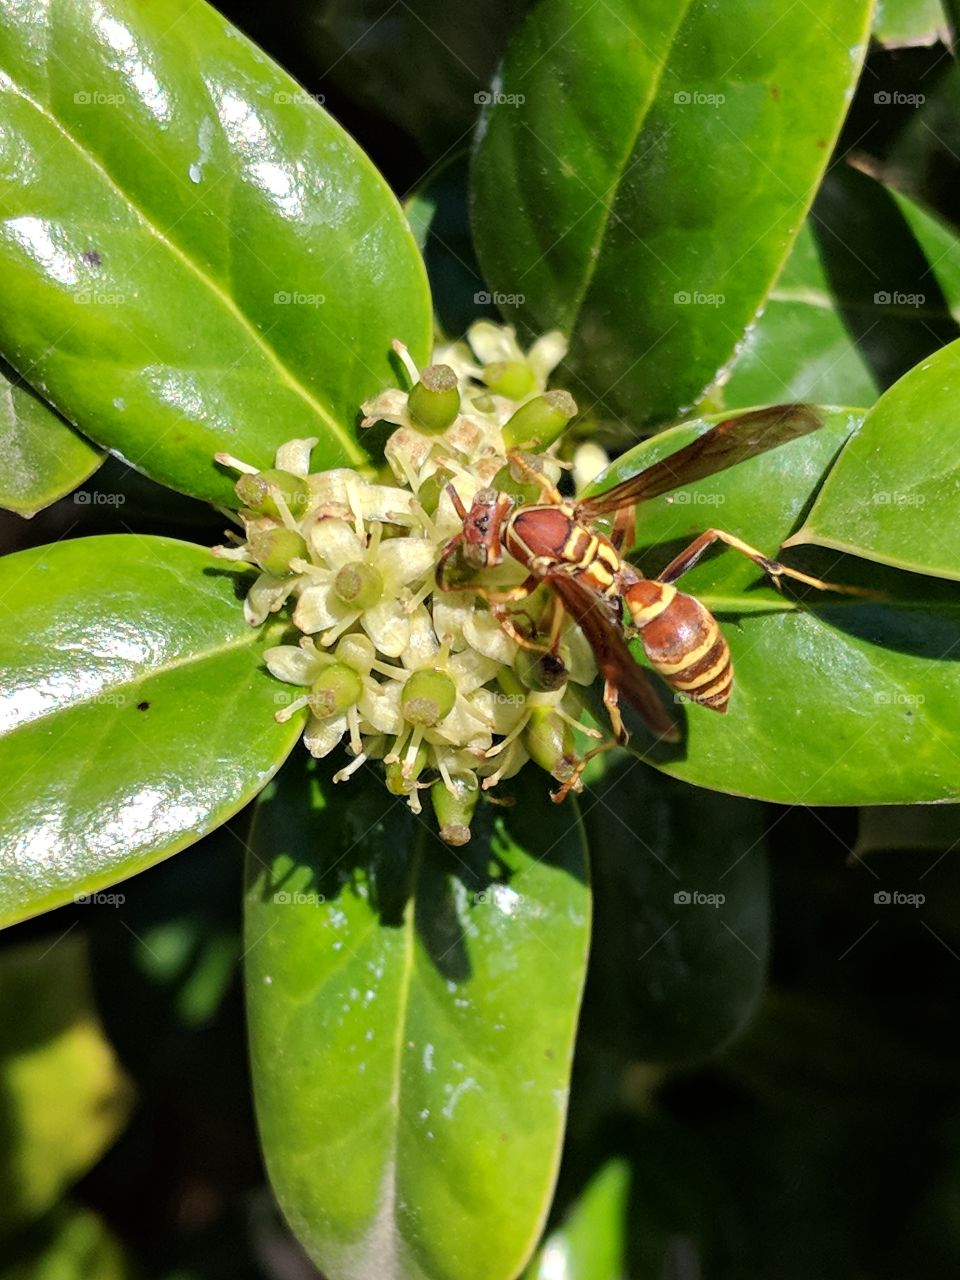 Holly attracting a paper wasp